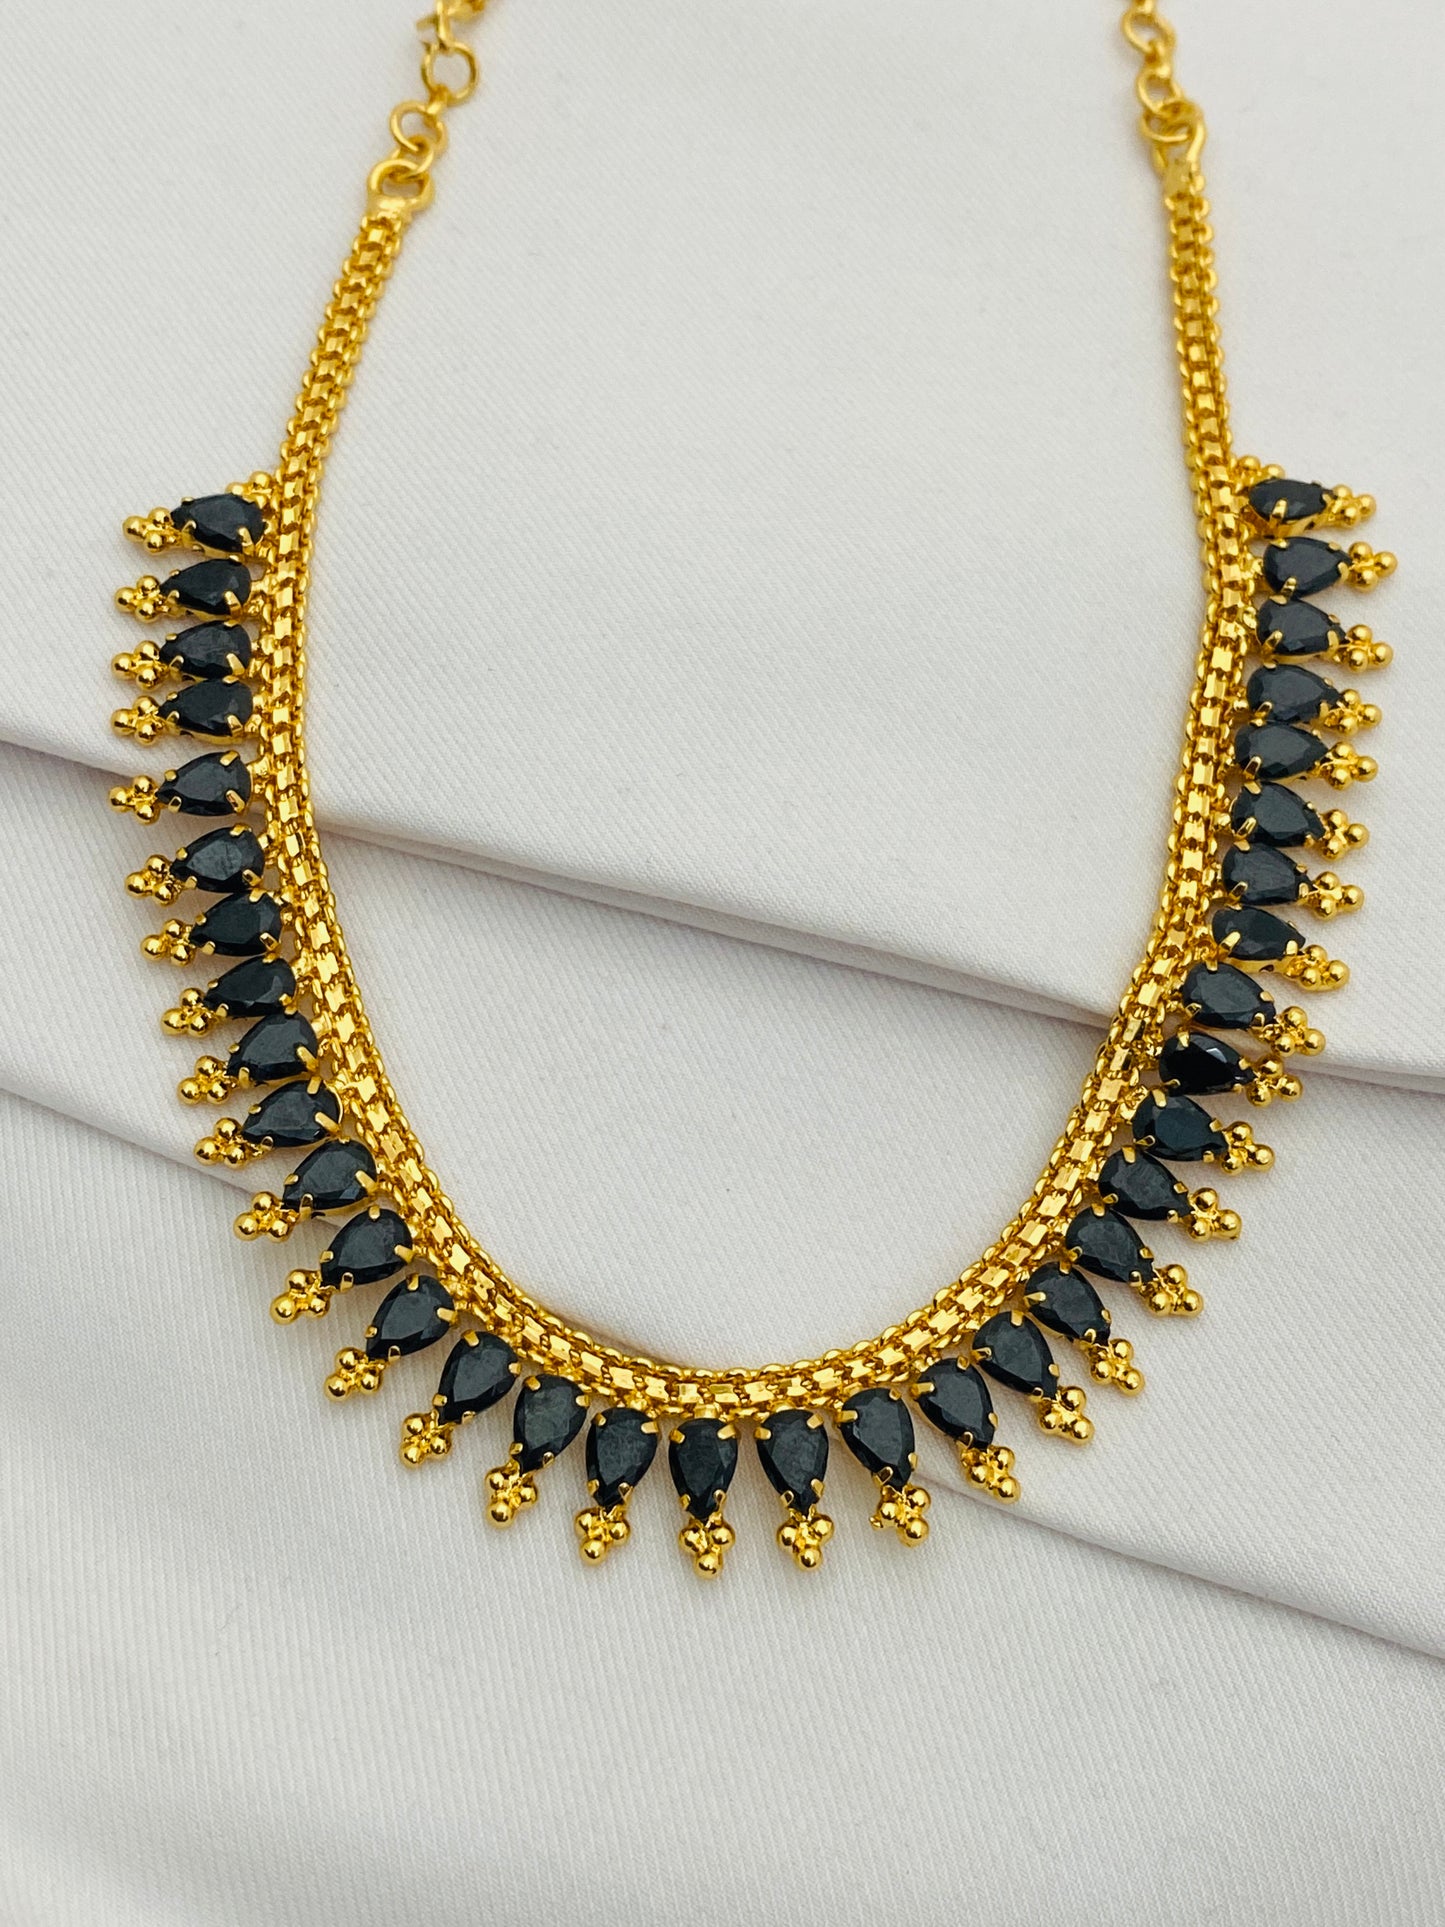 Lovely Ethnic Wear Gold Plated Necklace Near Me